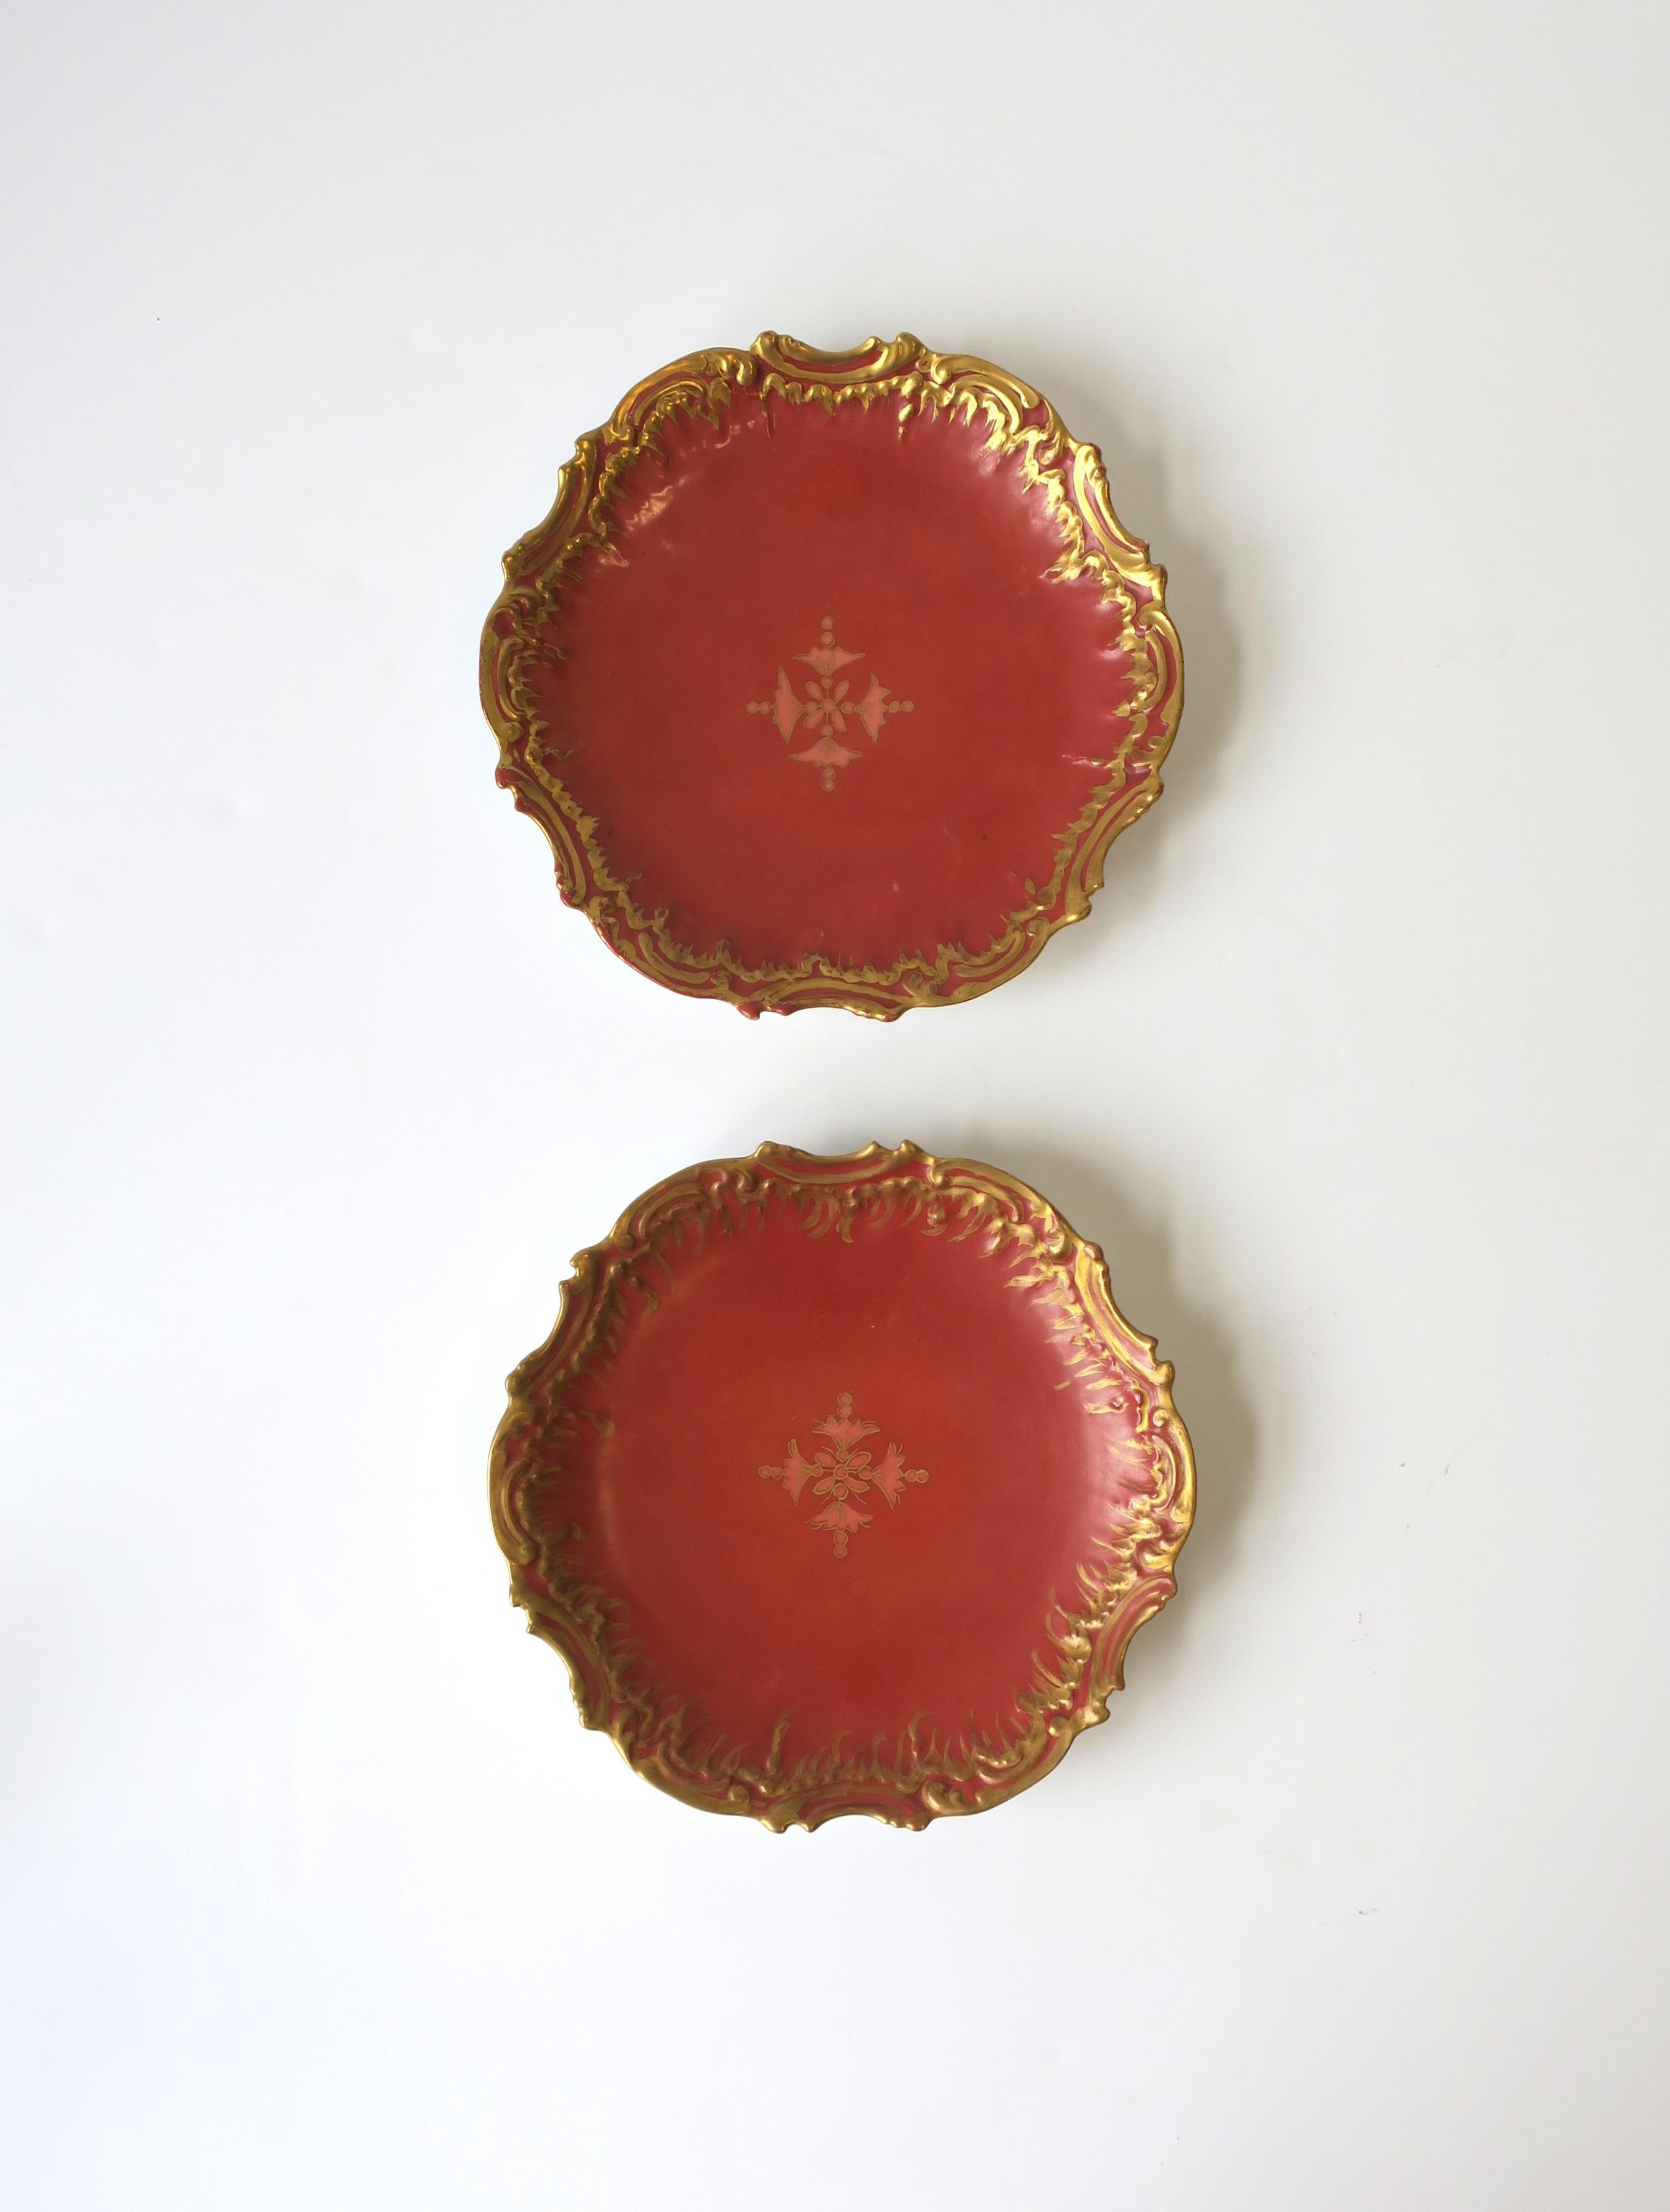 A beautiful pair of antique French Limoges porcelain plates, circa 19th century, France. Plates are predominantly a terracotta hue with a carnation pink center design, and a hand-painted gold raised decorative edge. A great set for entertaining, as